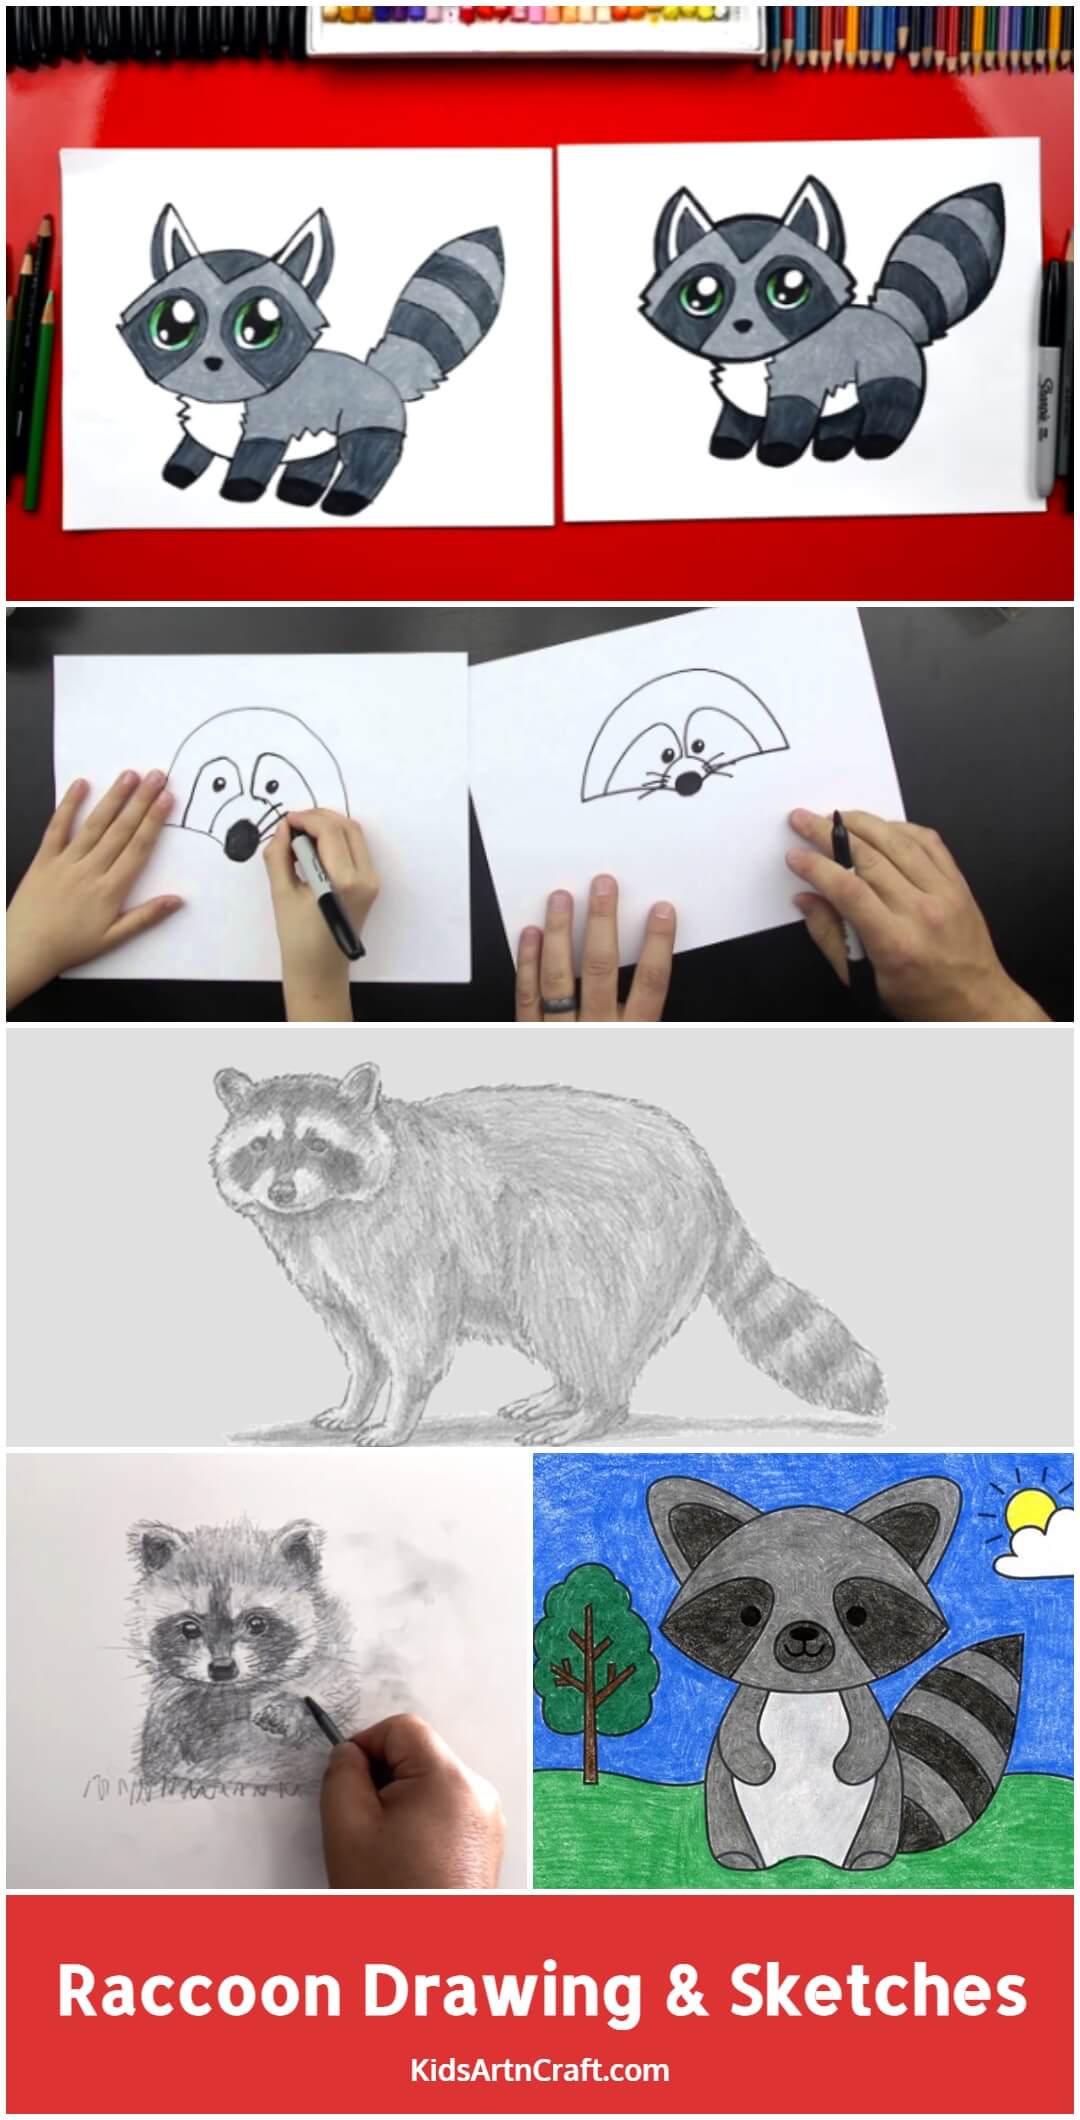 Raccoon Drawing & Sketches for Kids